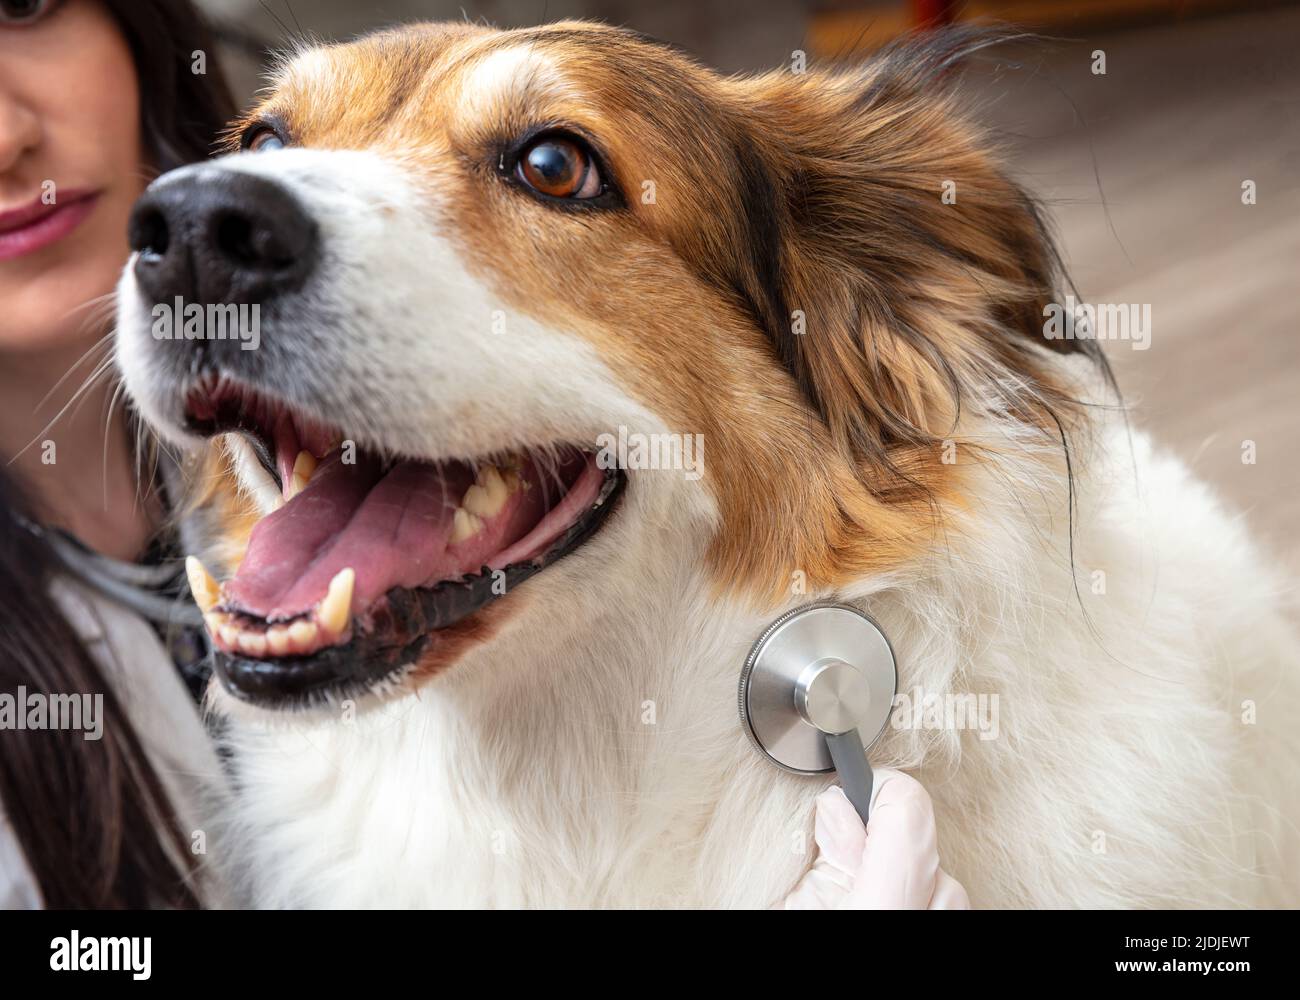 Veterinarian examining a dog. Vet clinic. Young woman holding a medical stethoscope, close up view. Pet checkup, healthy animal Stock Photo